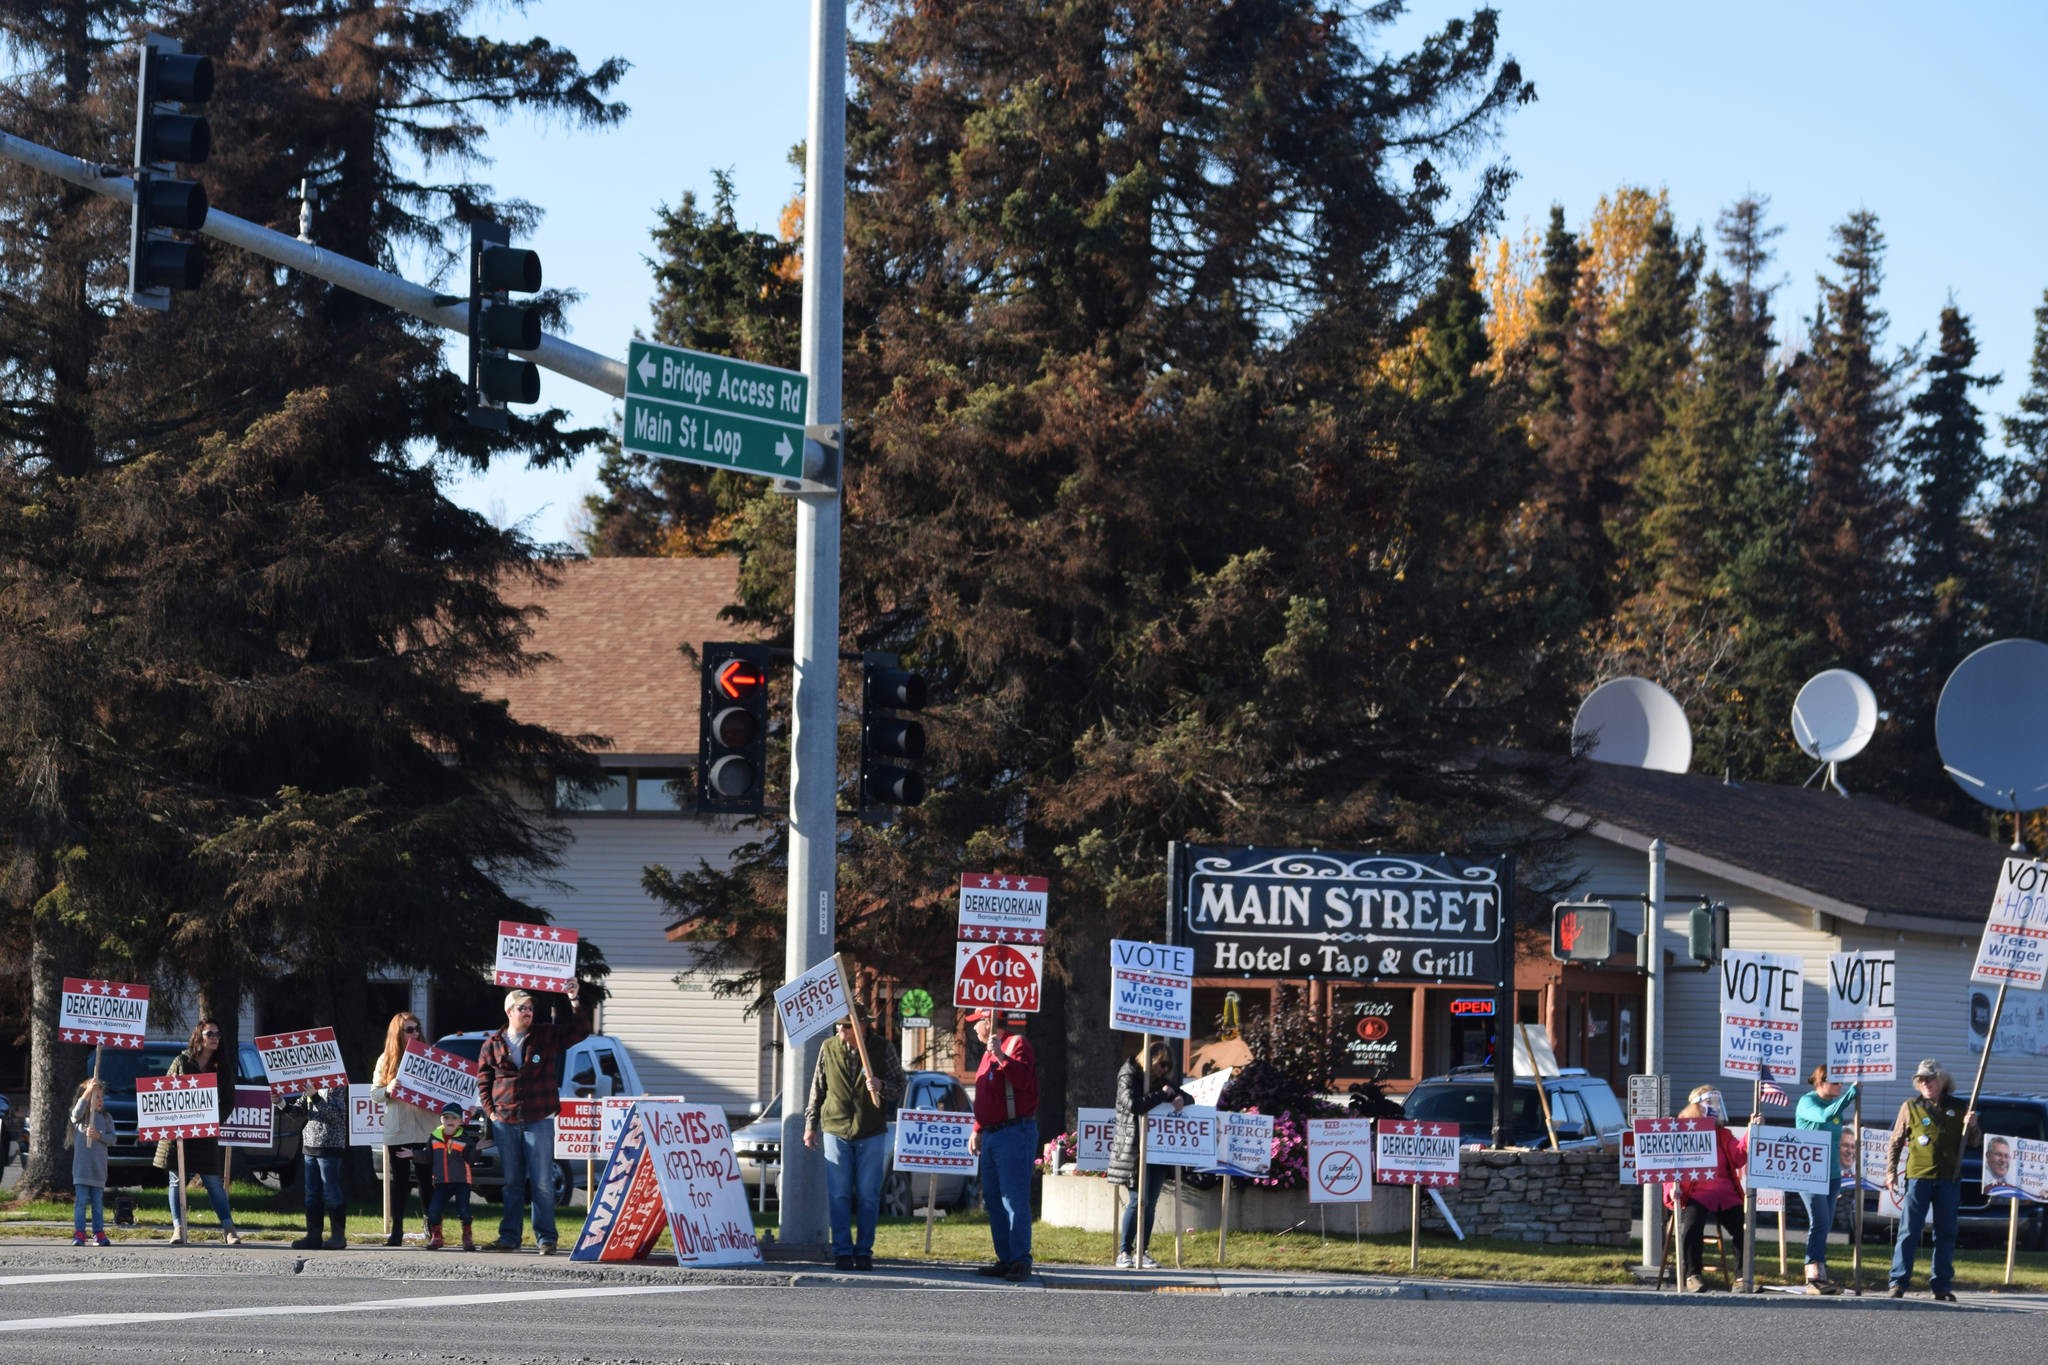 Supporters hold campaign signs at the intersection of Main St. Loop and Kenai Spur Highway in Kenai, Alaska, on Tuesday, Oct. 6. (Photo by Ashlyn O’Hara/Peninsula Clarion)